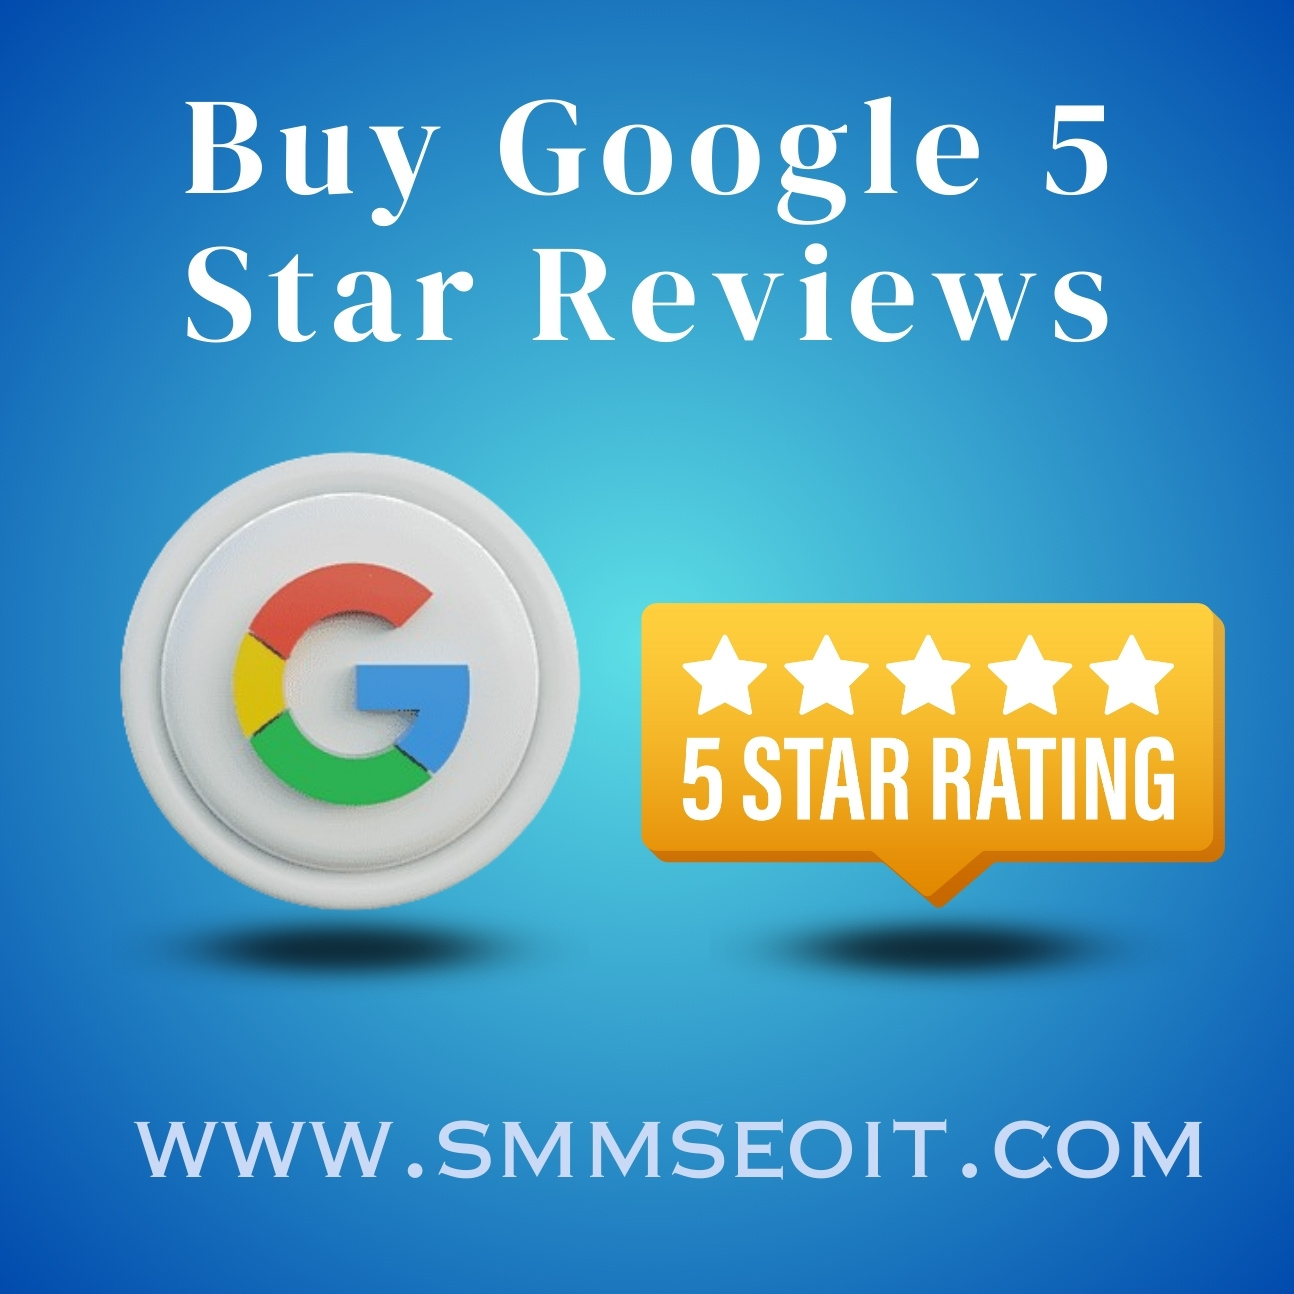 Best Sites to Buy Google 5 Star Reviews - 5star & Positive